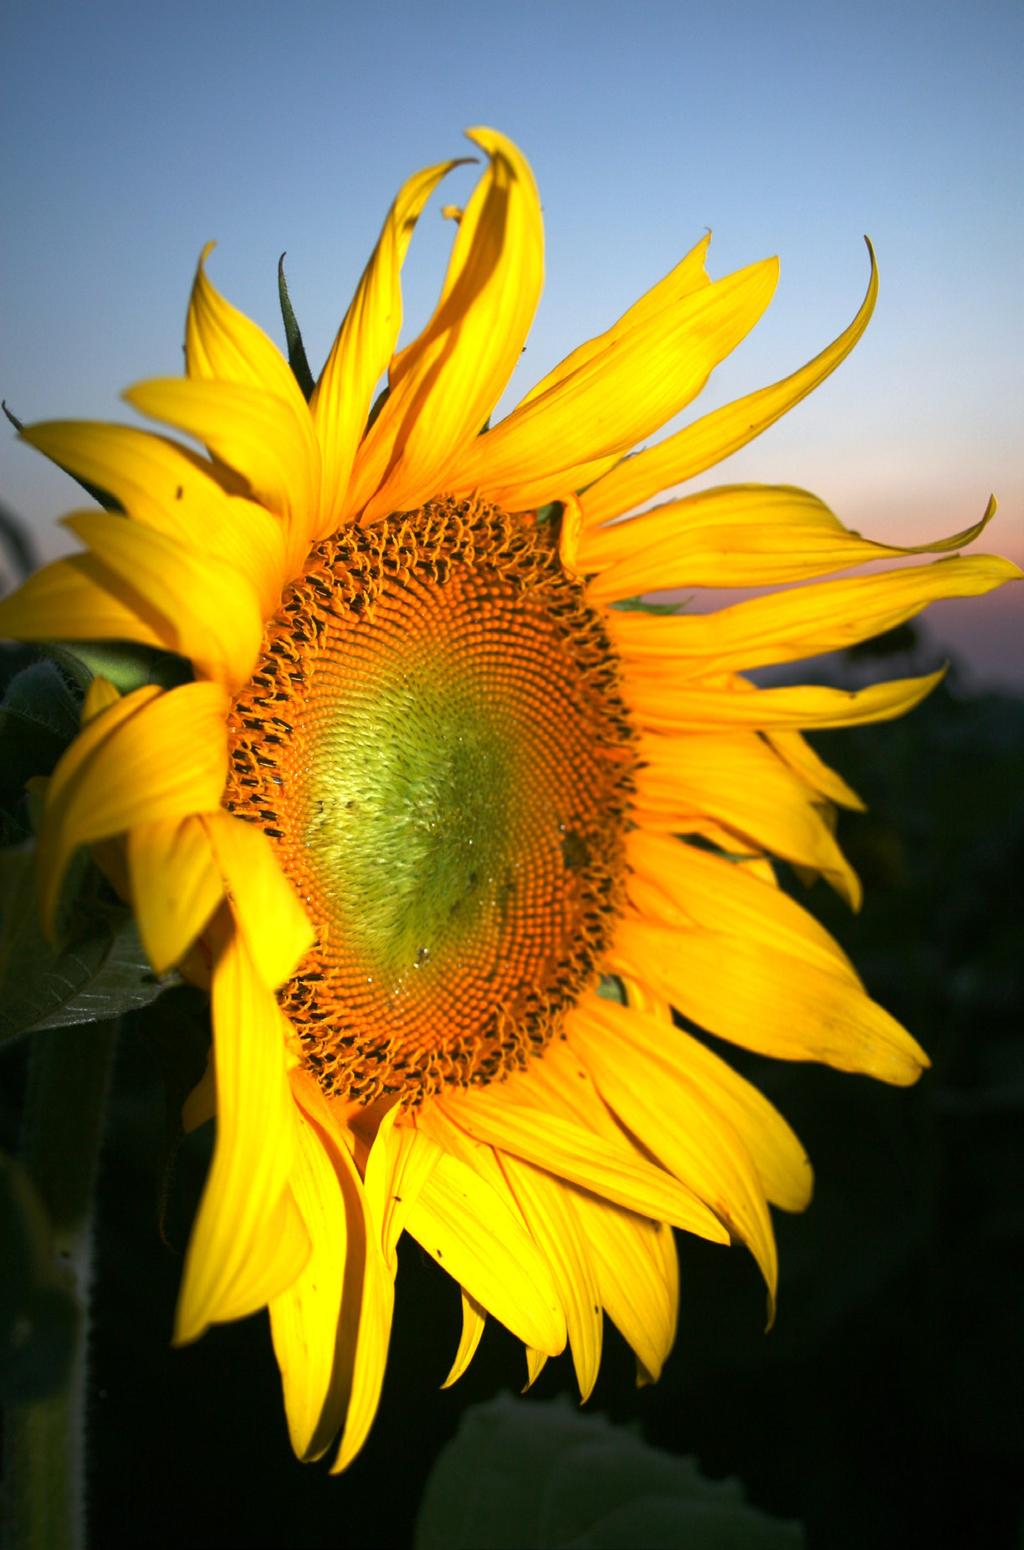 AS1623 (Revised) Sunflower Meal in Beef Cattle Diets Revised by Greg Lardy Animal Sciences Department Head Sunflowers were first domesticated by Native Americans in the southwestern United States in